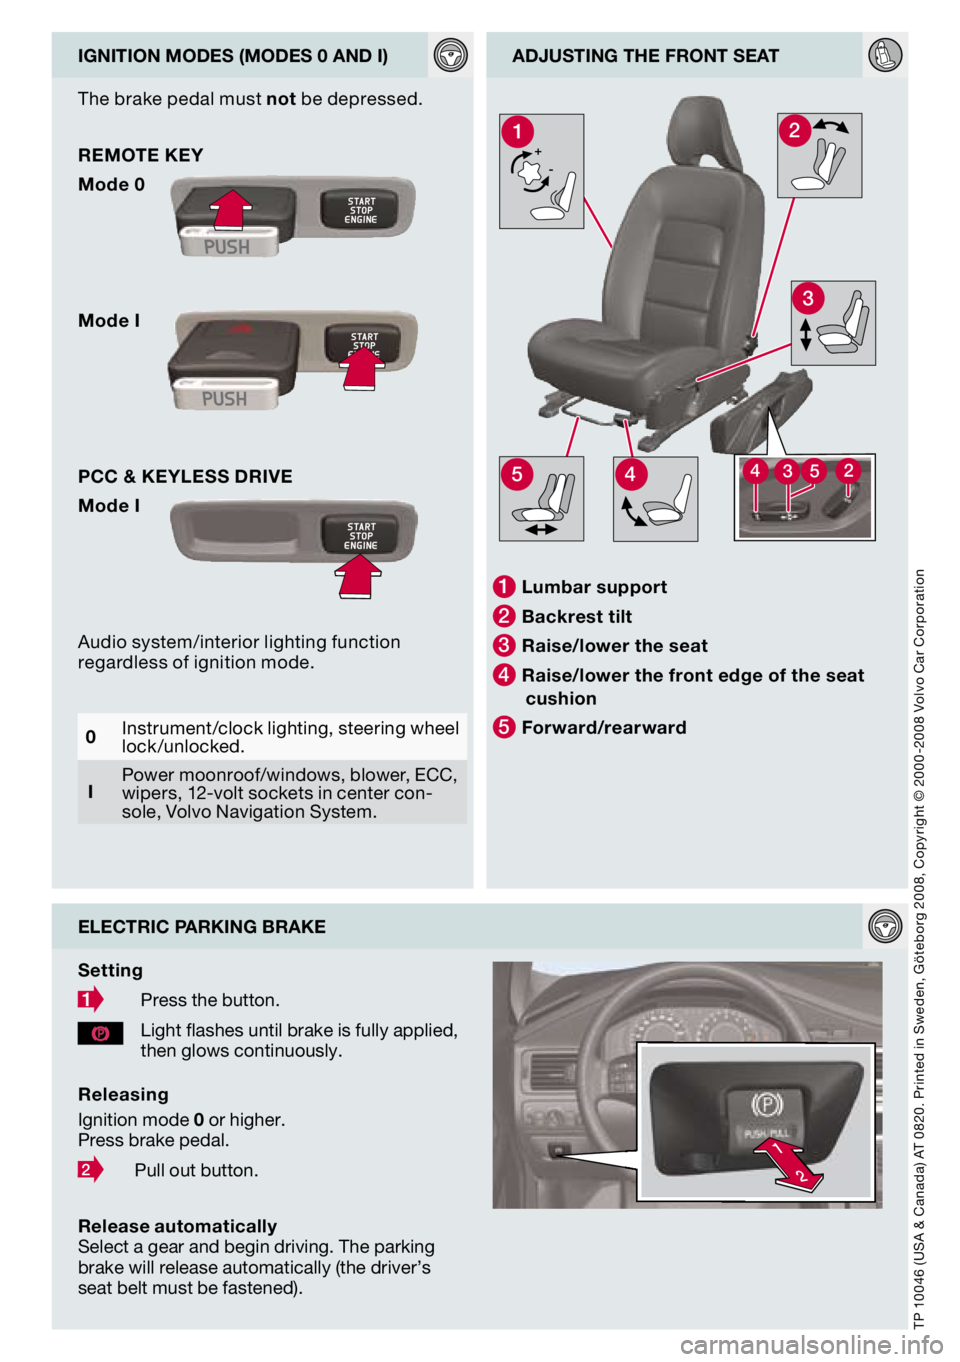 VOLVO S80 2009  Quick Guide 
2
1

+-
3
21
544352

igNiTiON MOdEs (MOdEs 0 ANd i)AdjUsTiNg ThE fRONT sEAT
TP 10046 (USA & Canada) AT 0820. Printed in Sweden, Göteborg 2008, Copyright © 2000 -2008 Volvo Car Corporation
ELECTRiC 